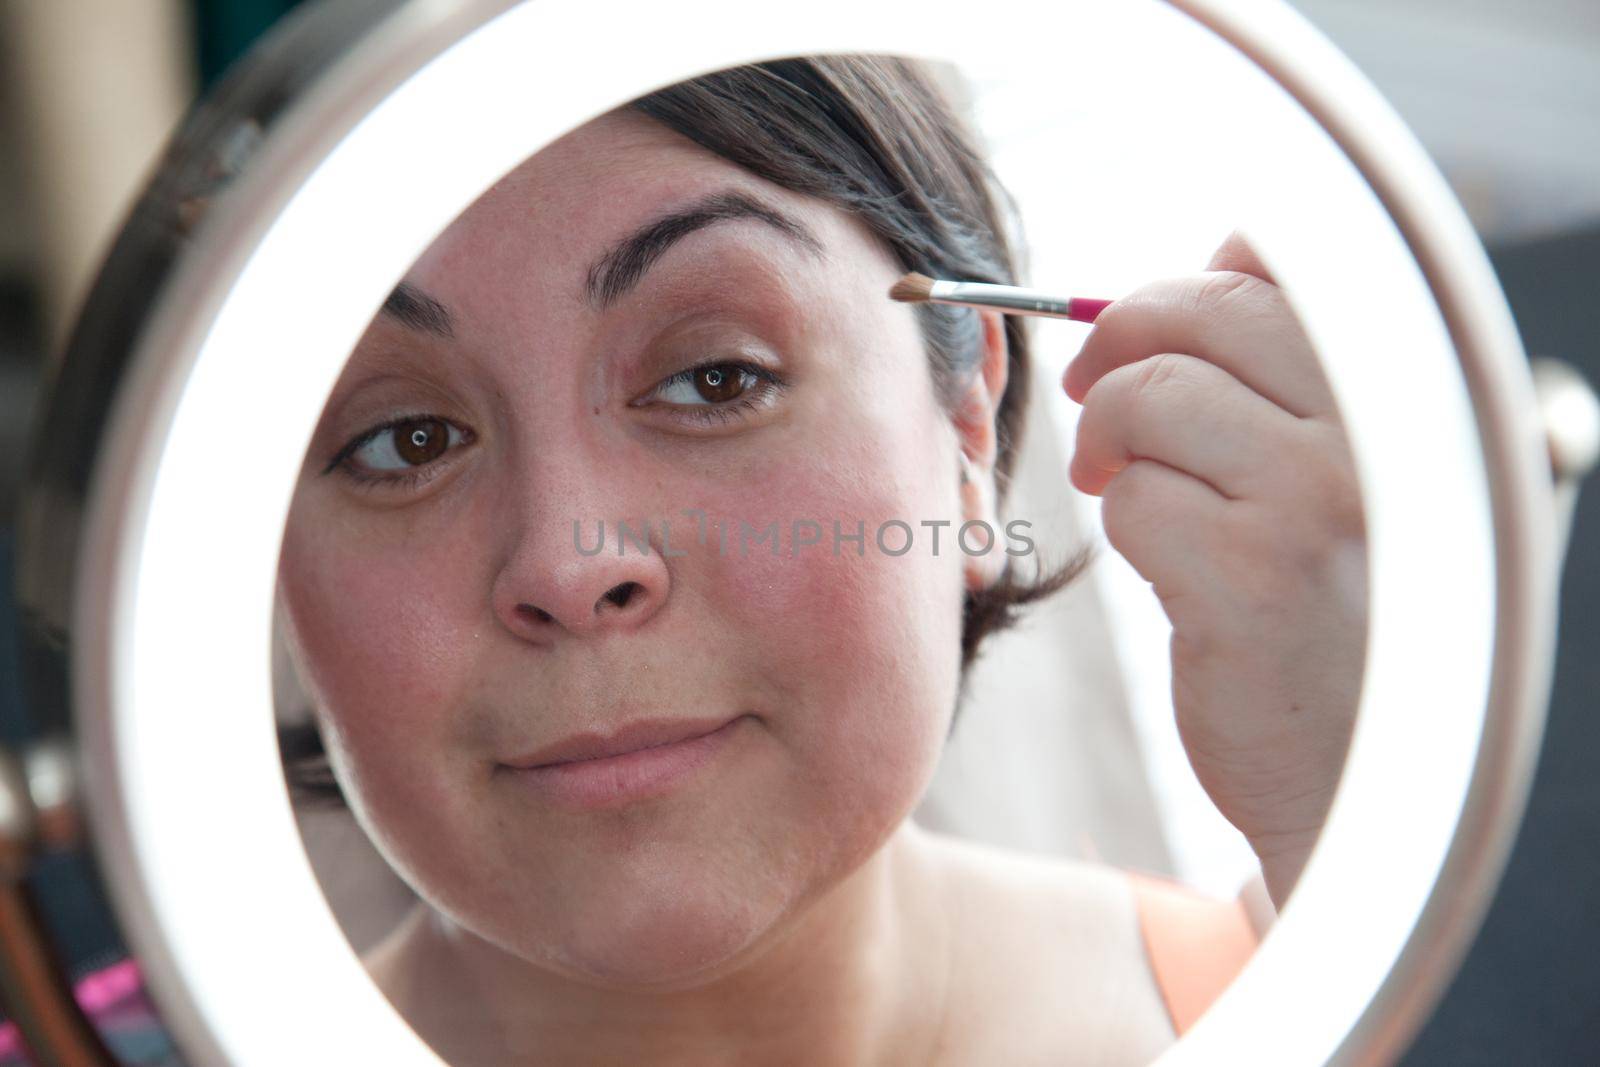 Looking in a round vanity mirror, a woman holds a brush to apply makeup 